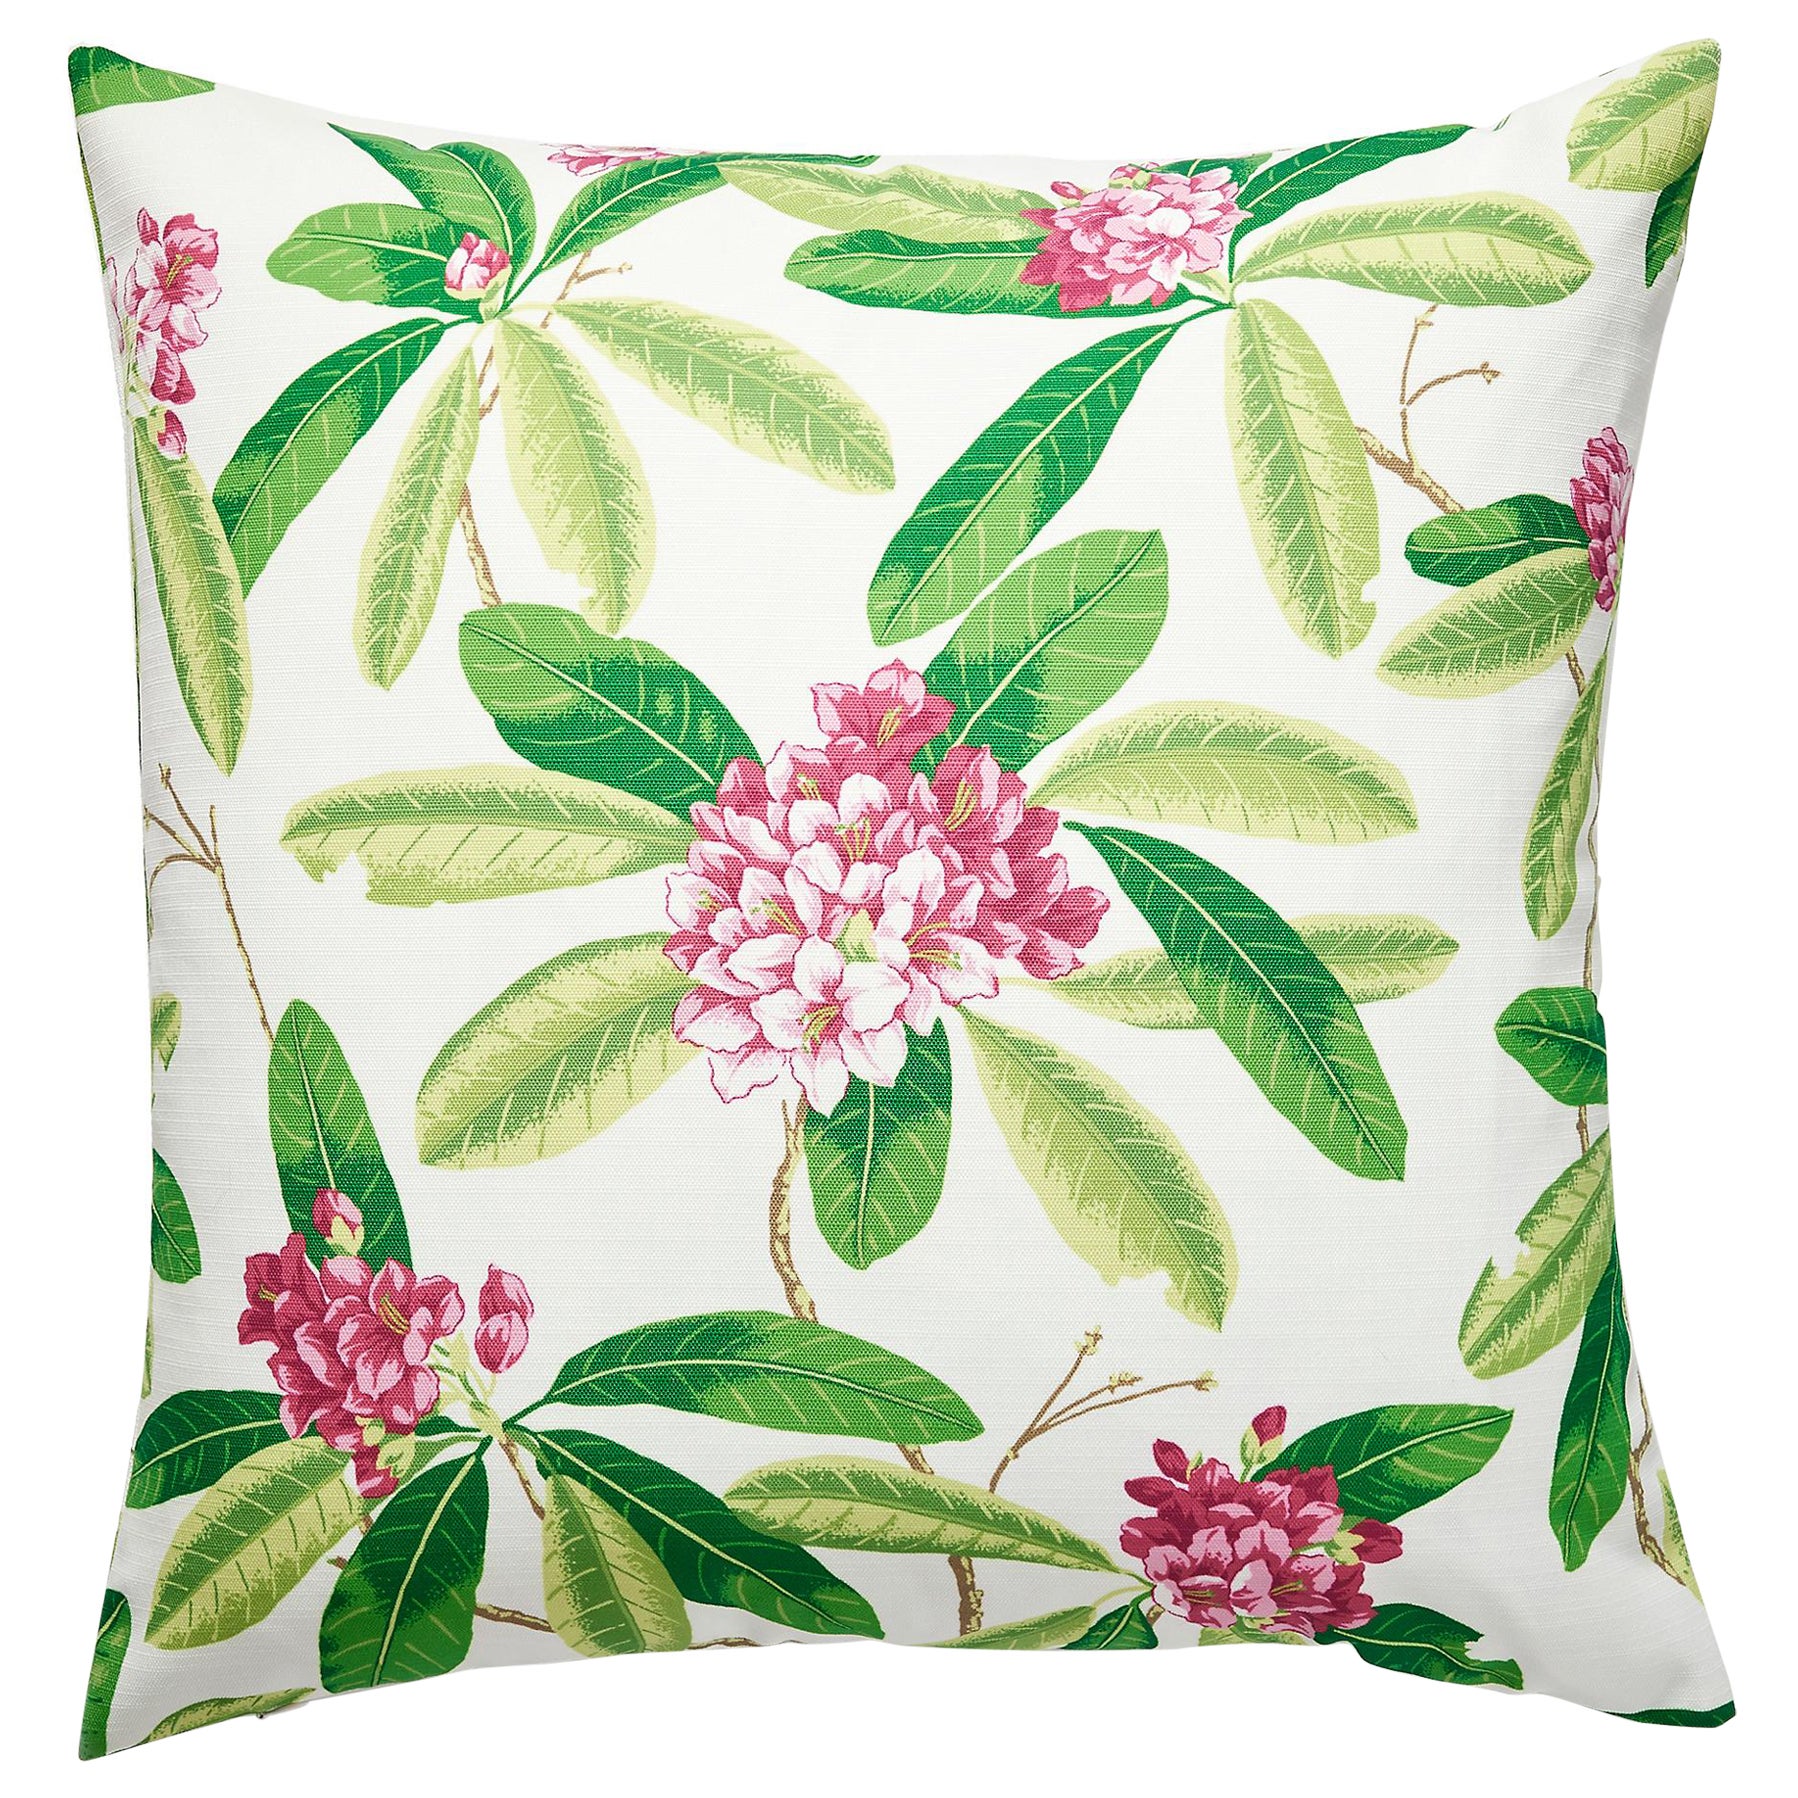 Rhododendron Outdoor Pillow For Sale